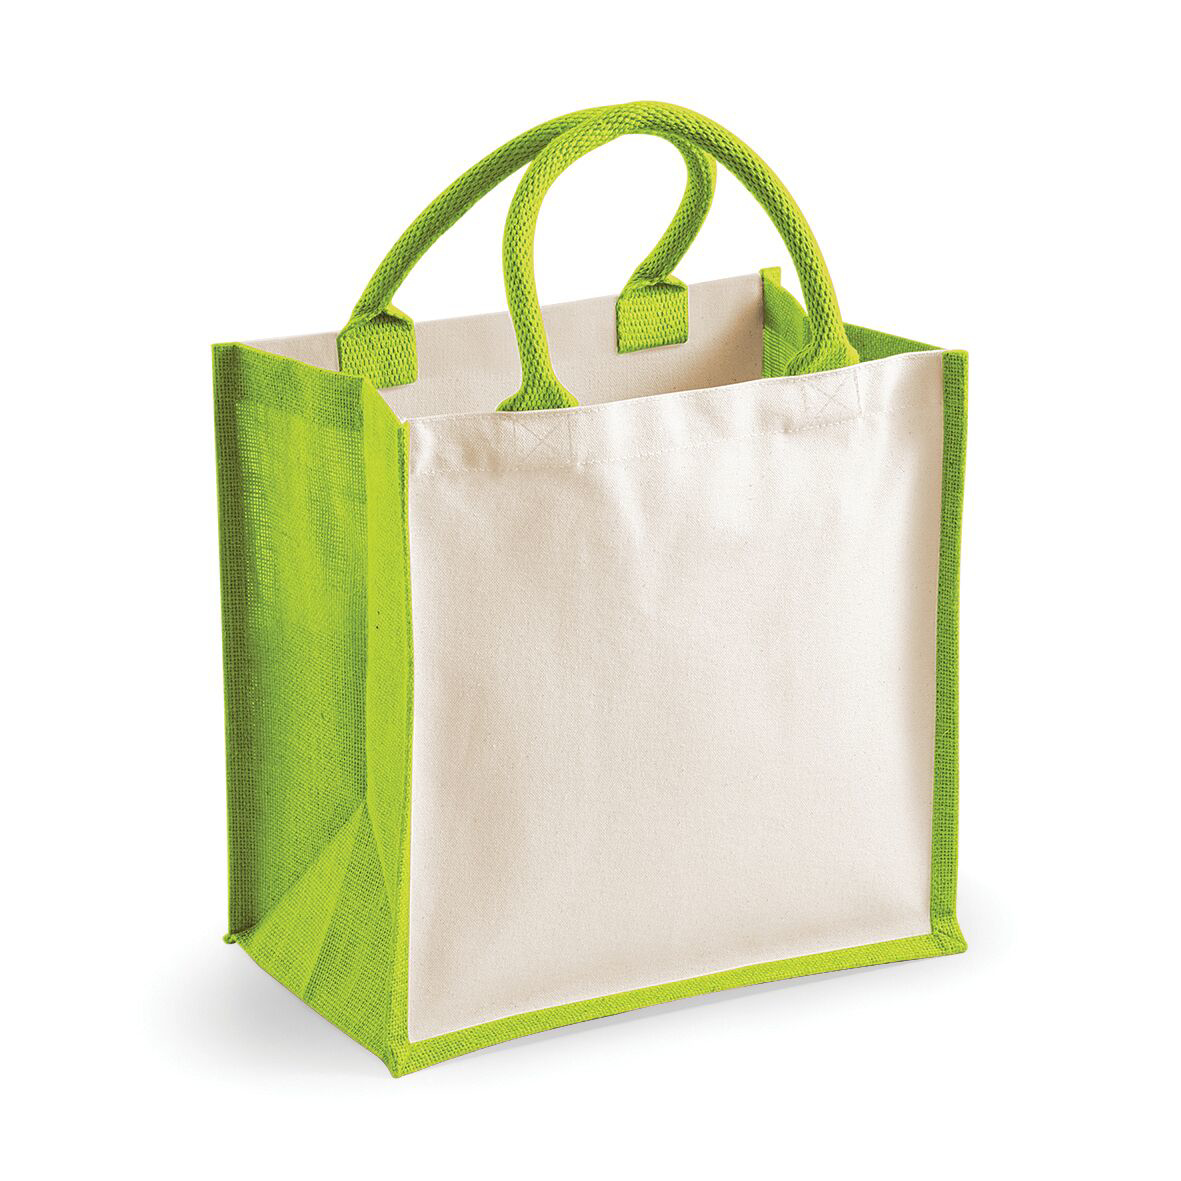 natural jute bag with lime green gusset panels and handles